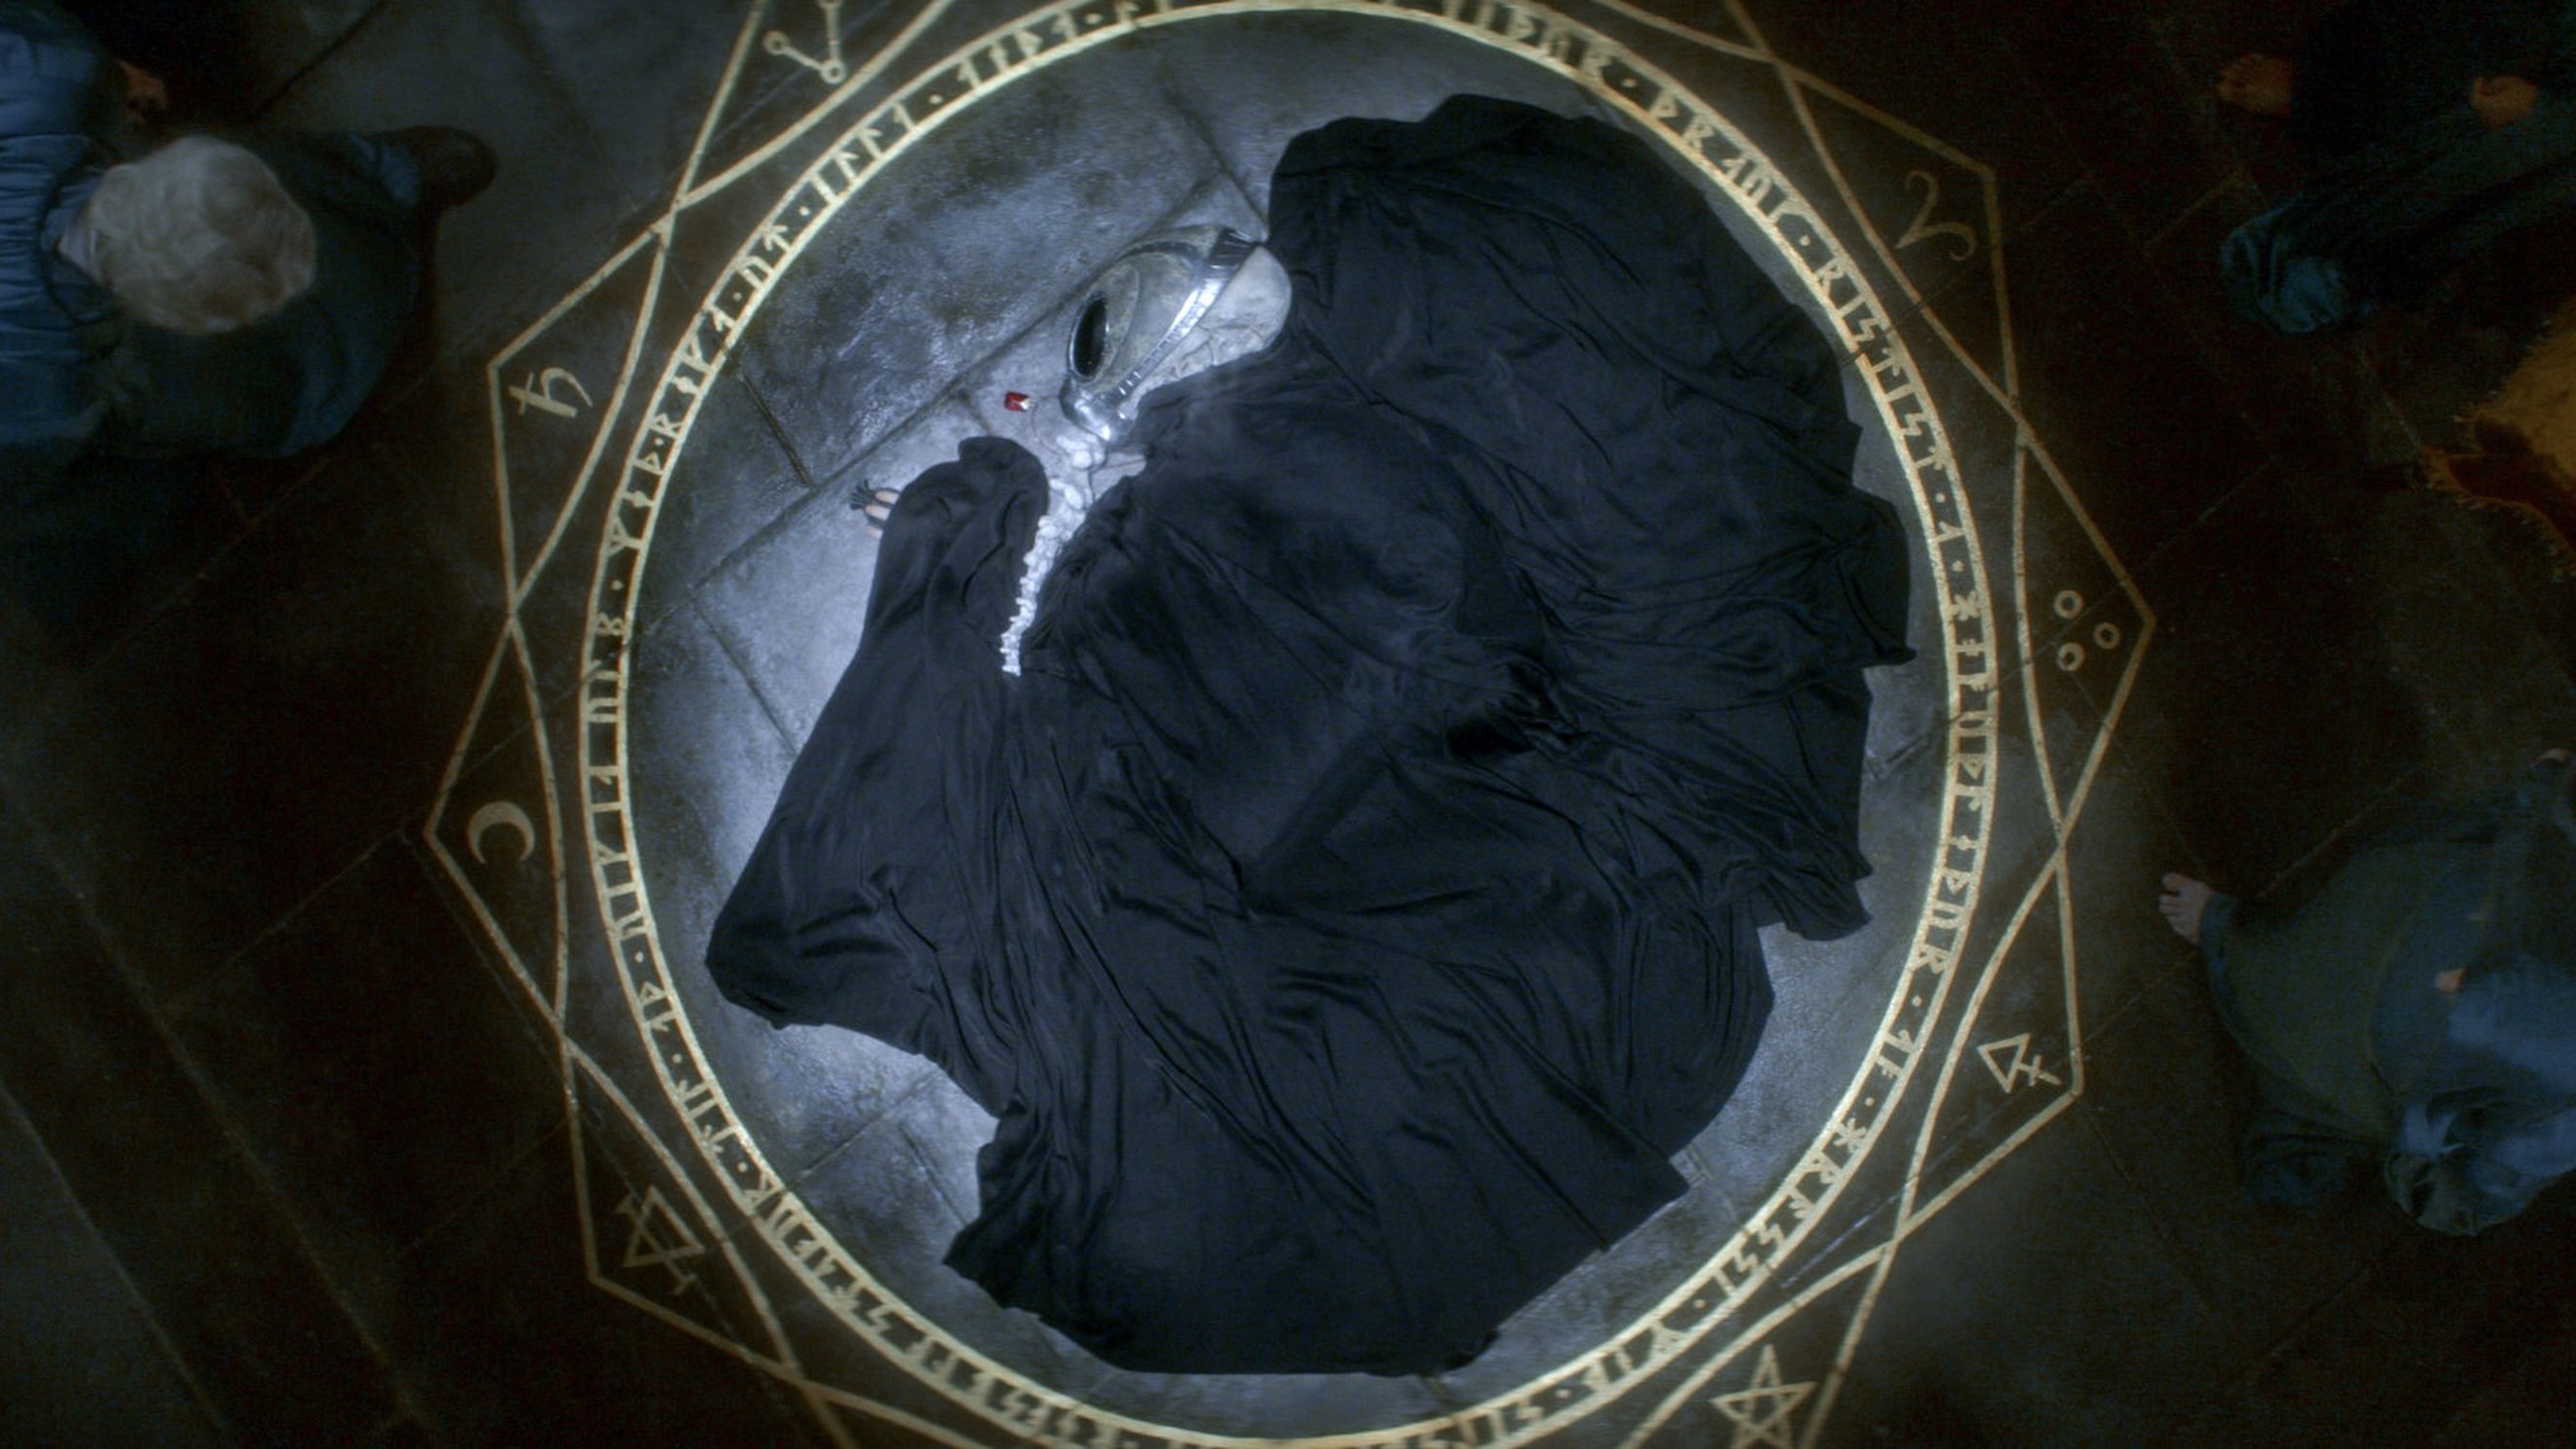 A helmeted figure cloaked in black lies curled up in a gold summoning circle on a stone floor.